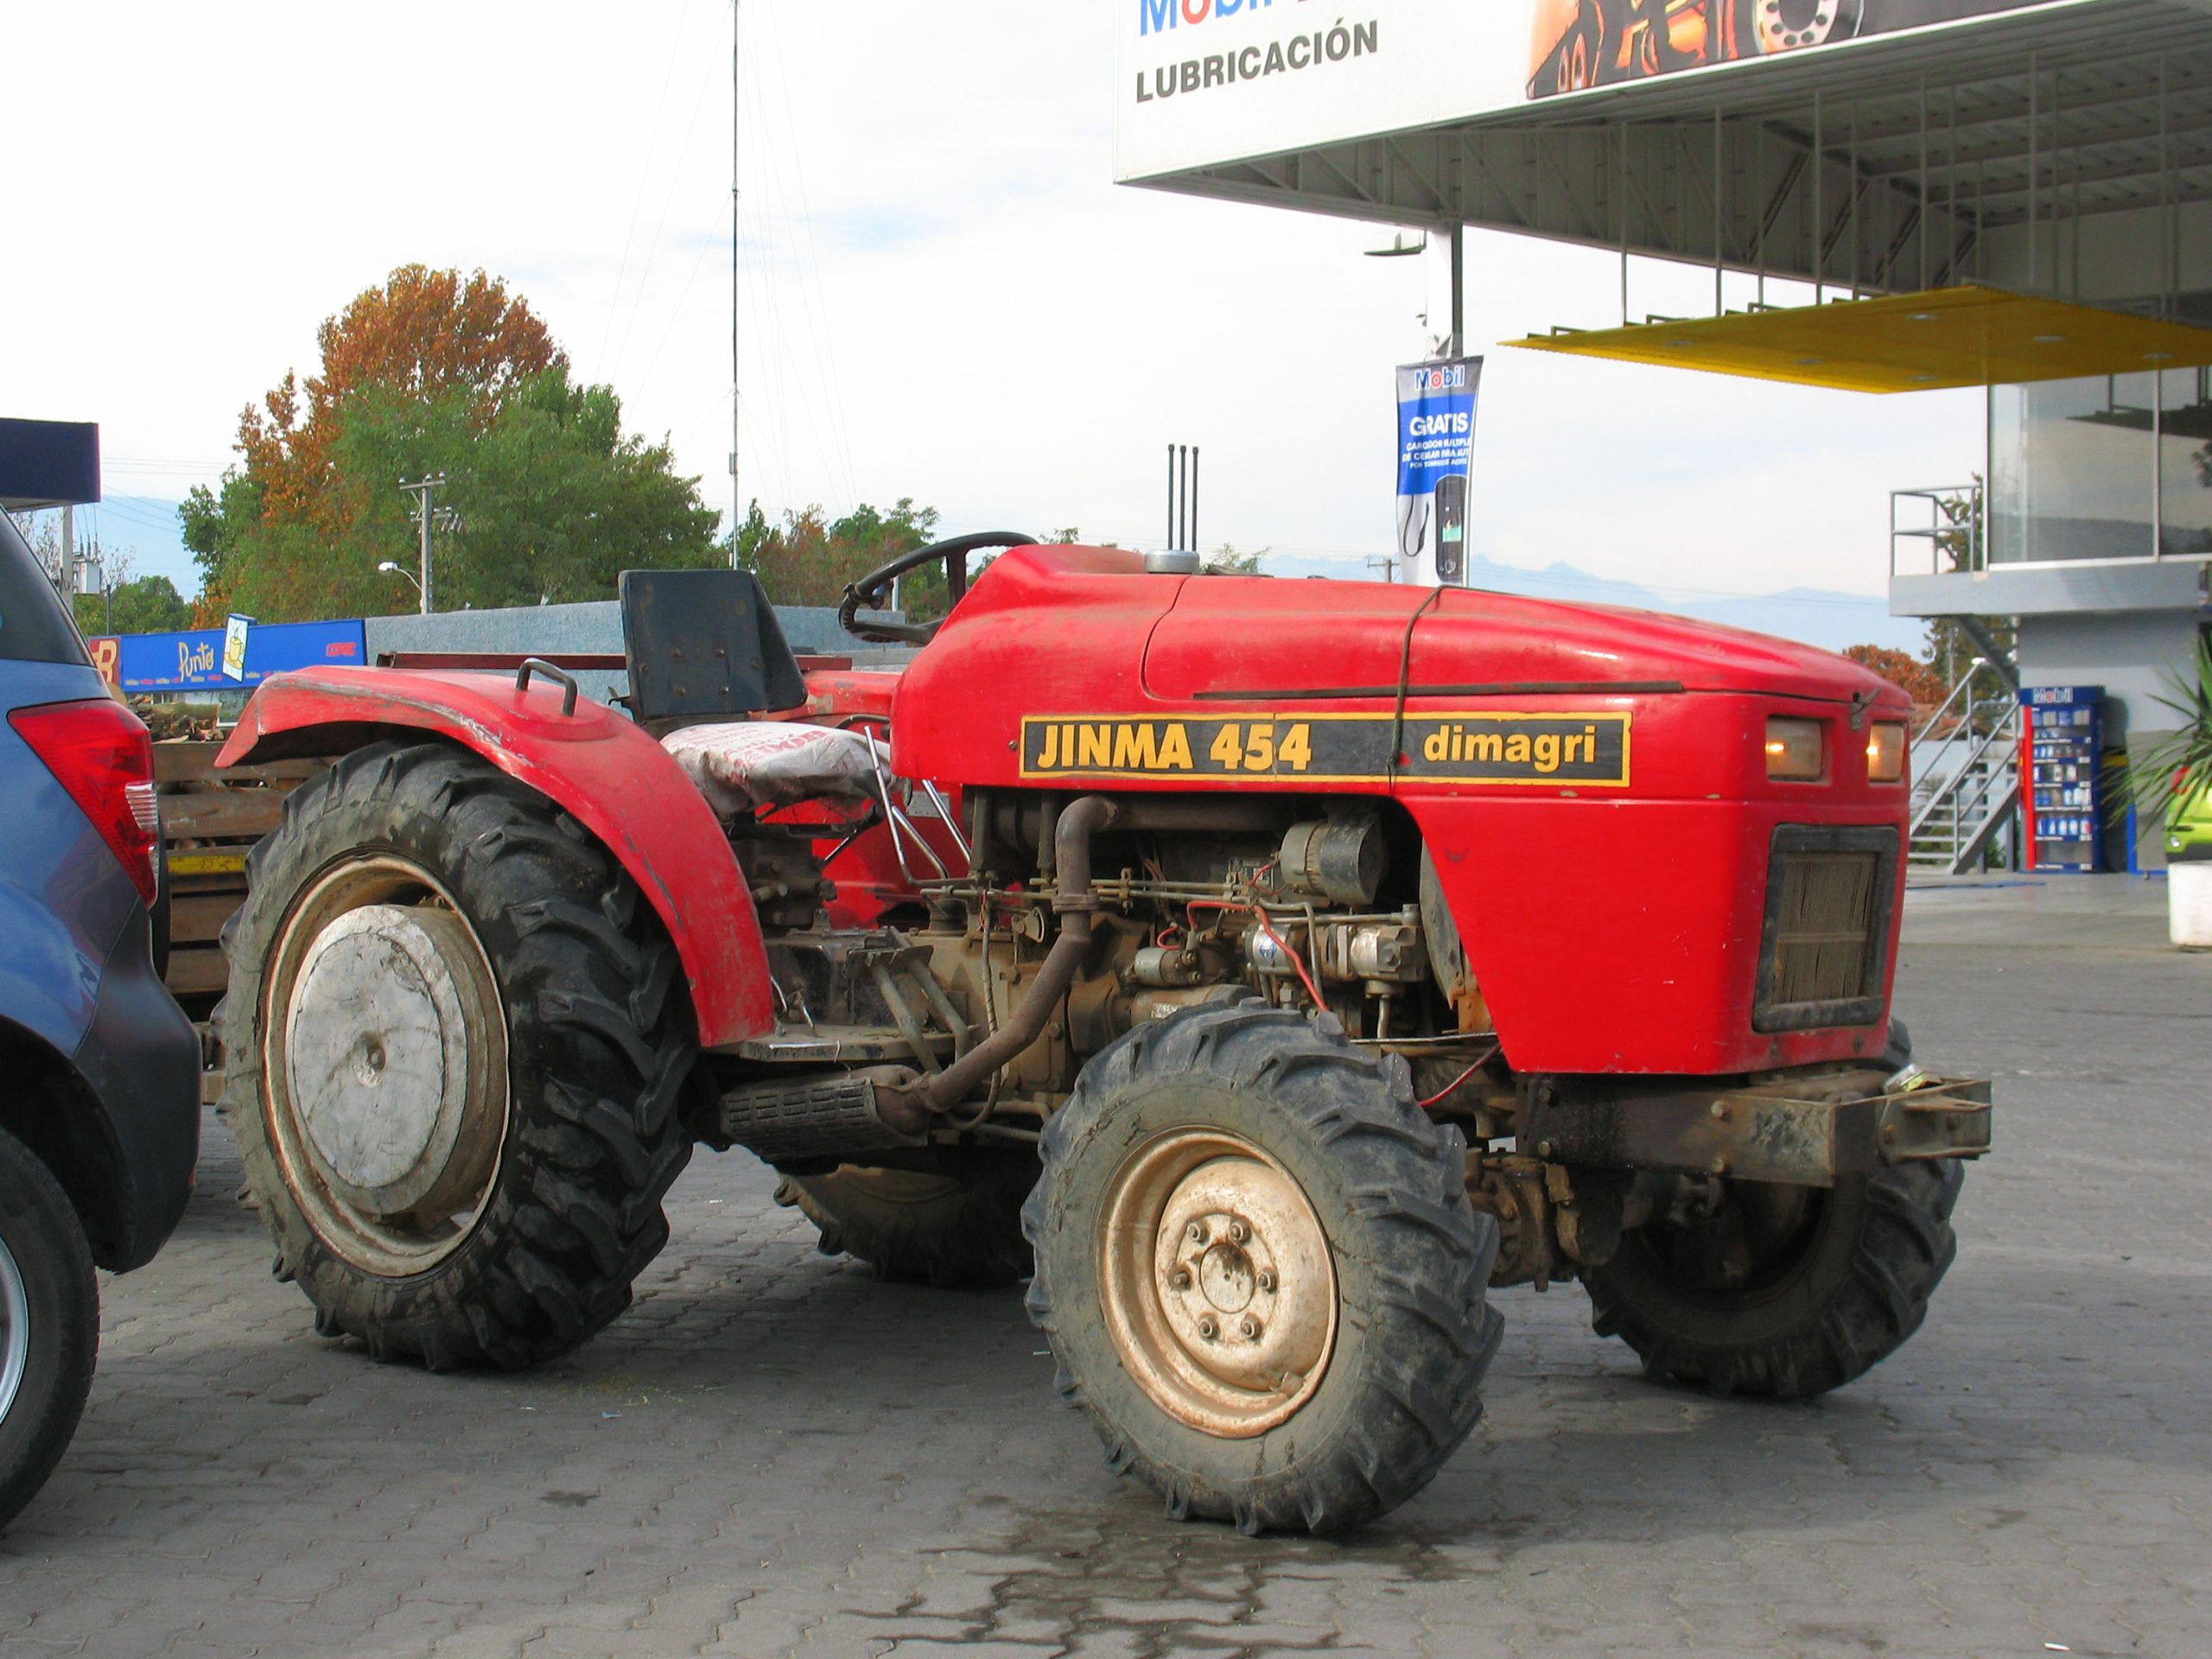 Jinma Tractor Problems: Common Issues and How to Fix Them